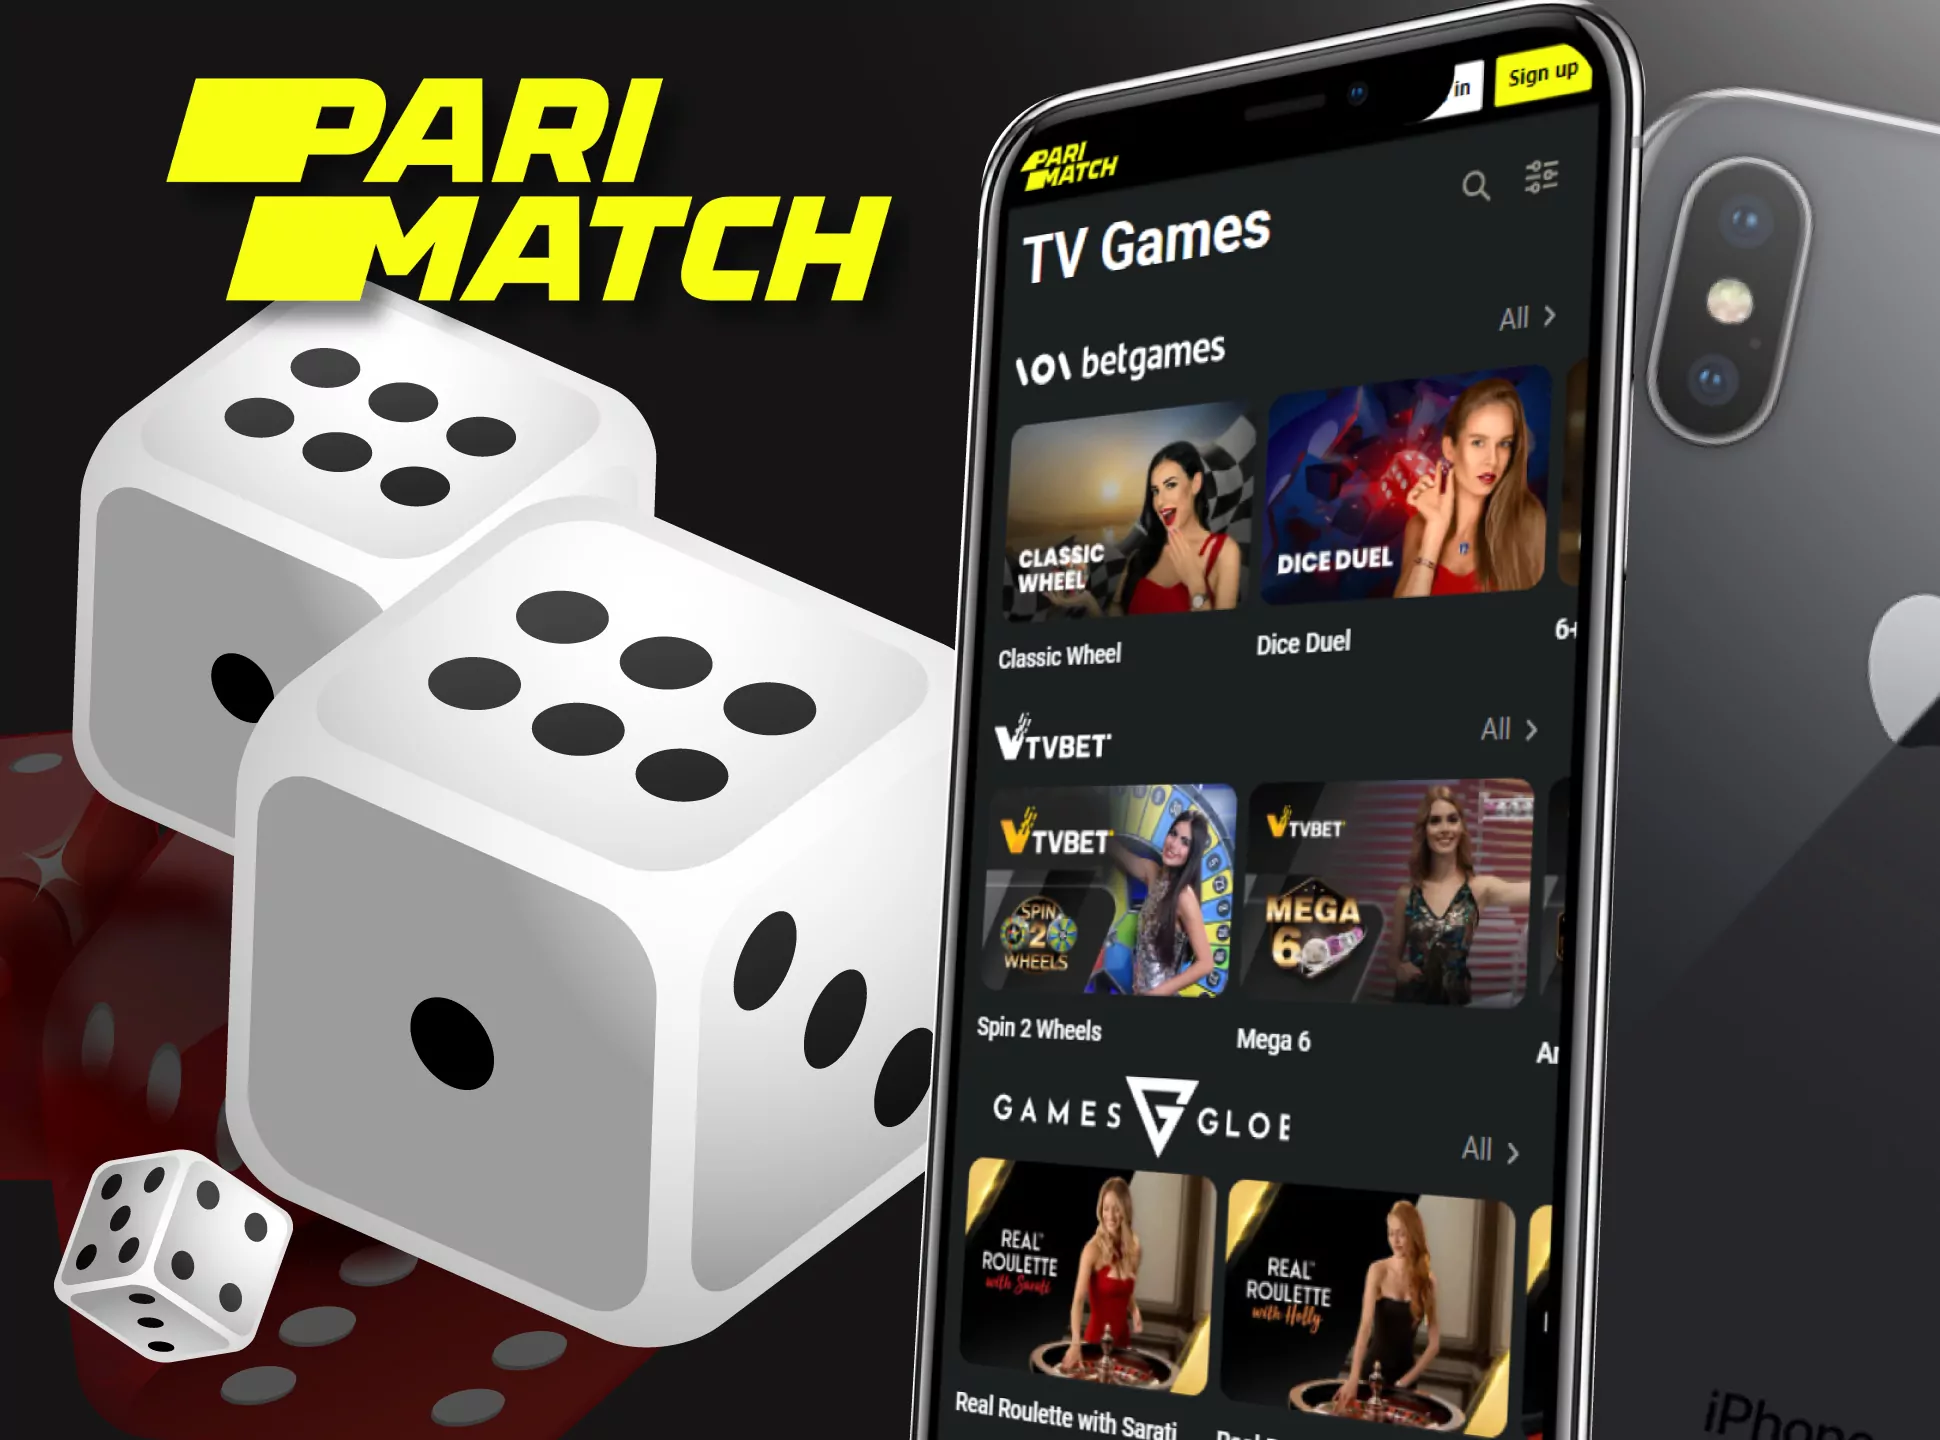 There are also TV games in the Parimatch app.